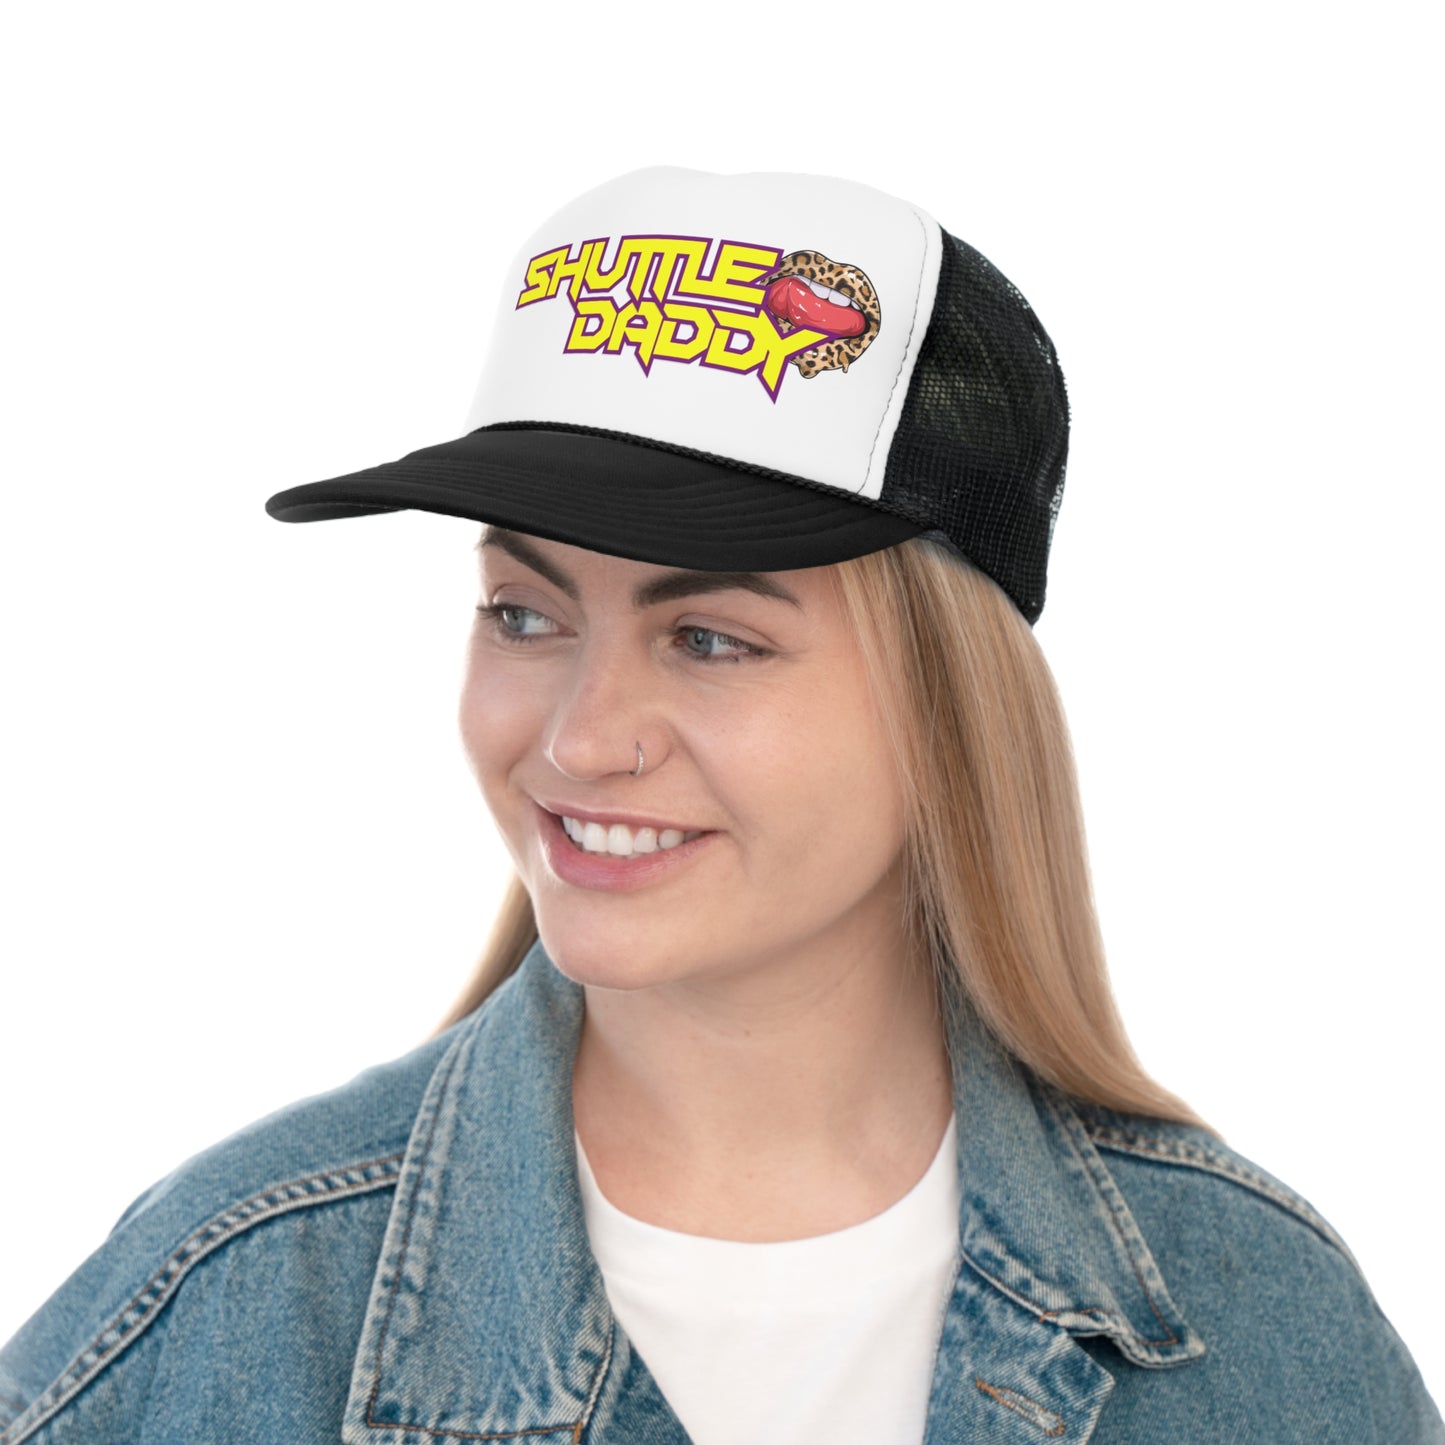 The perfect hat for your Shuttle Daddy